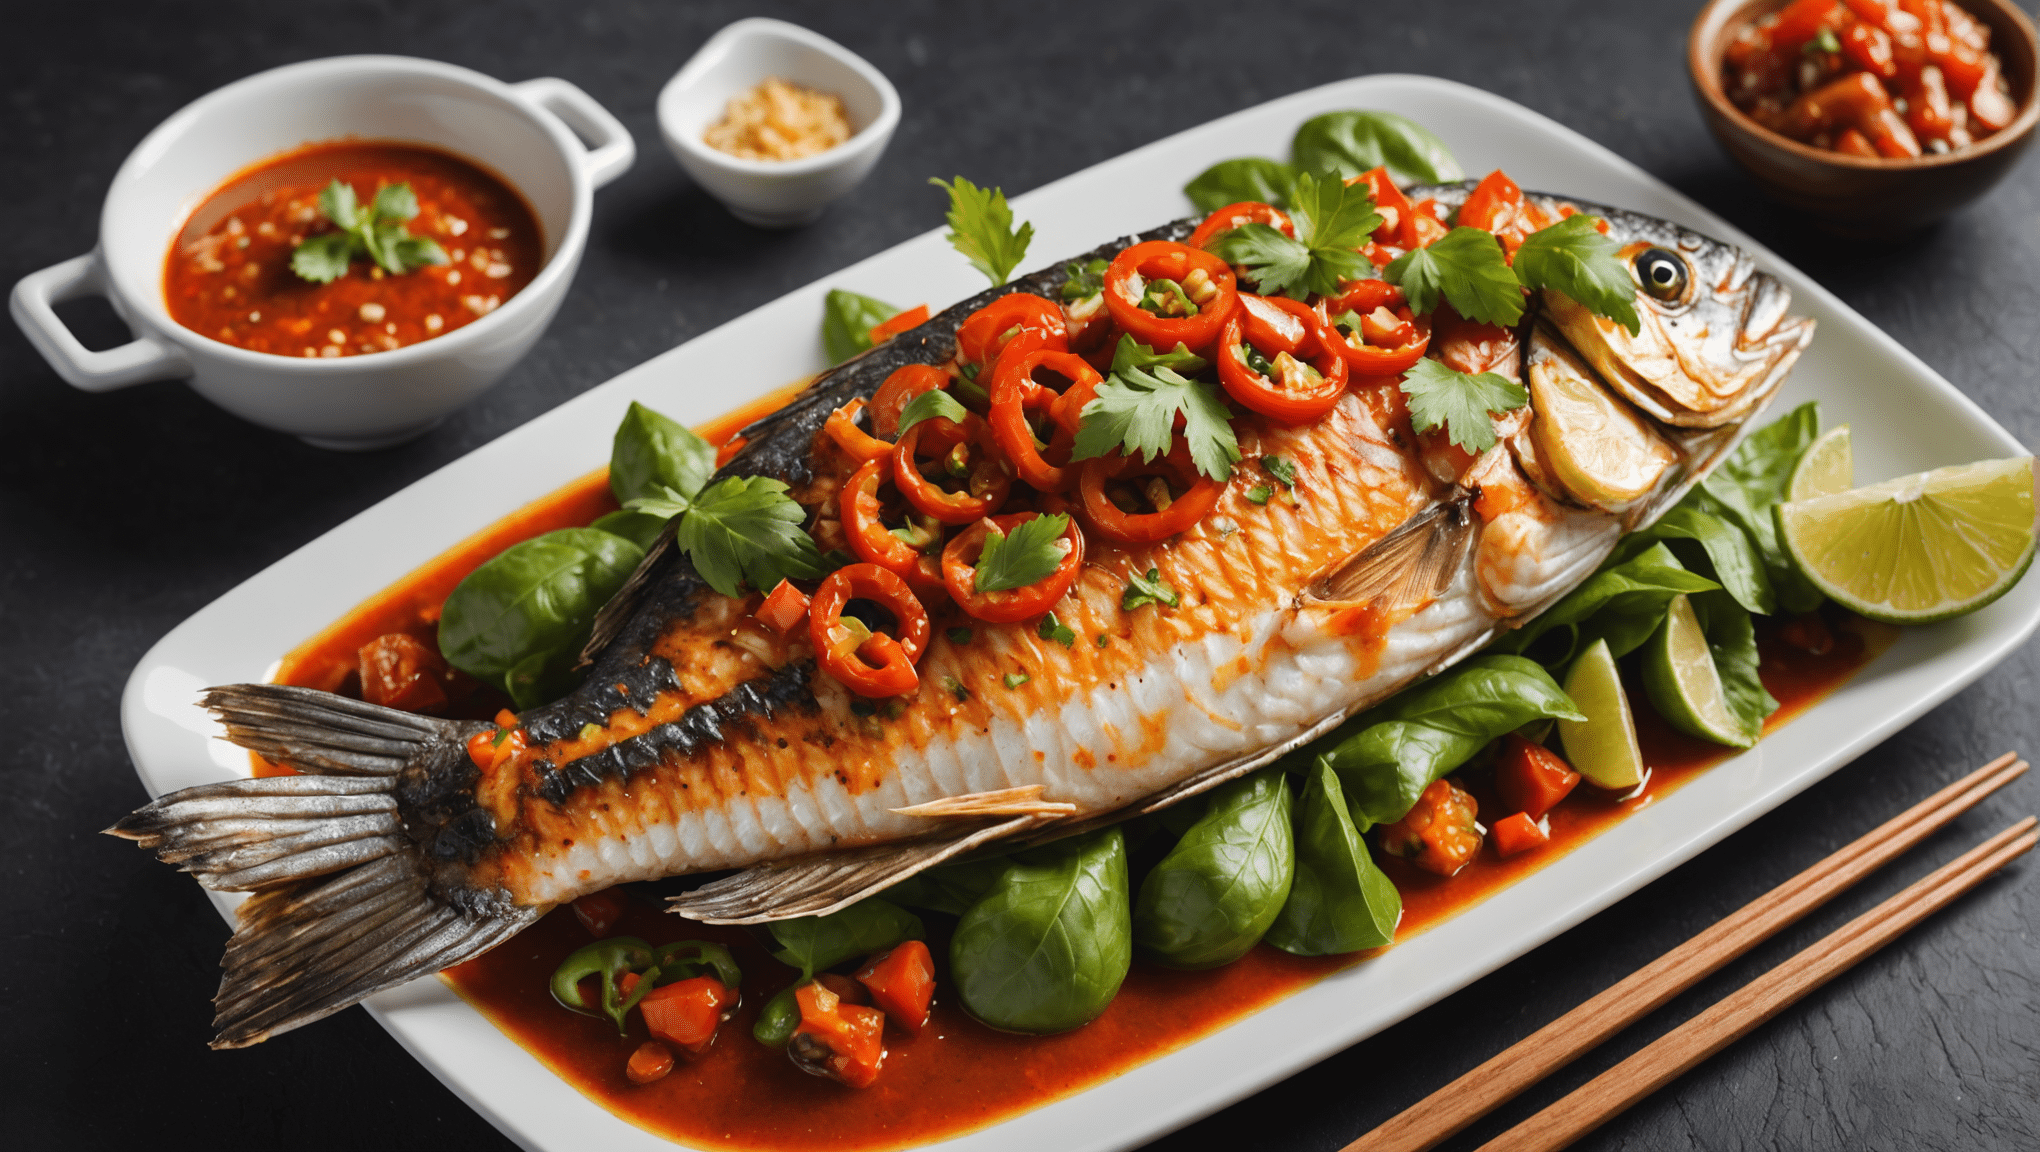 Grilled Fish with Chili and Tomato Sauce